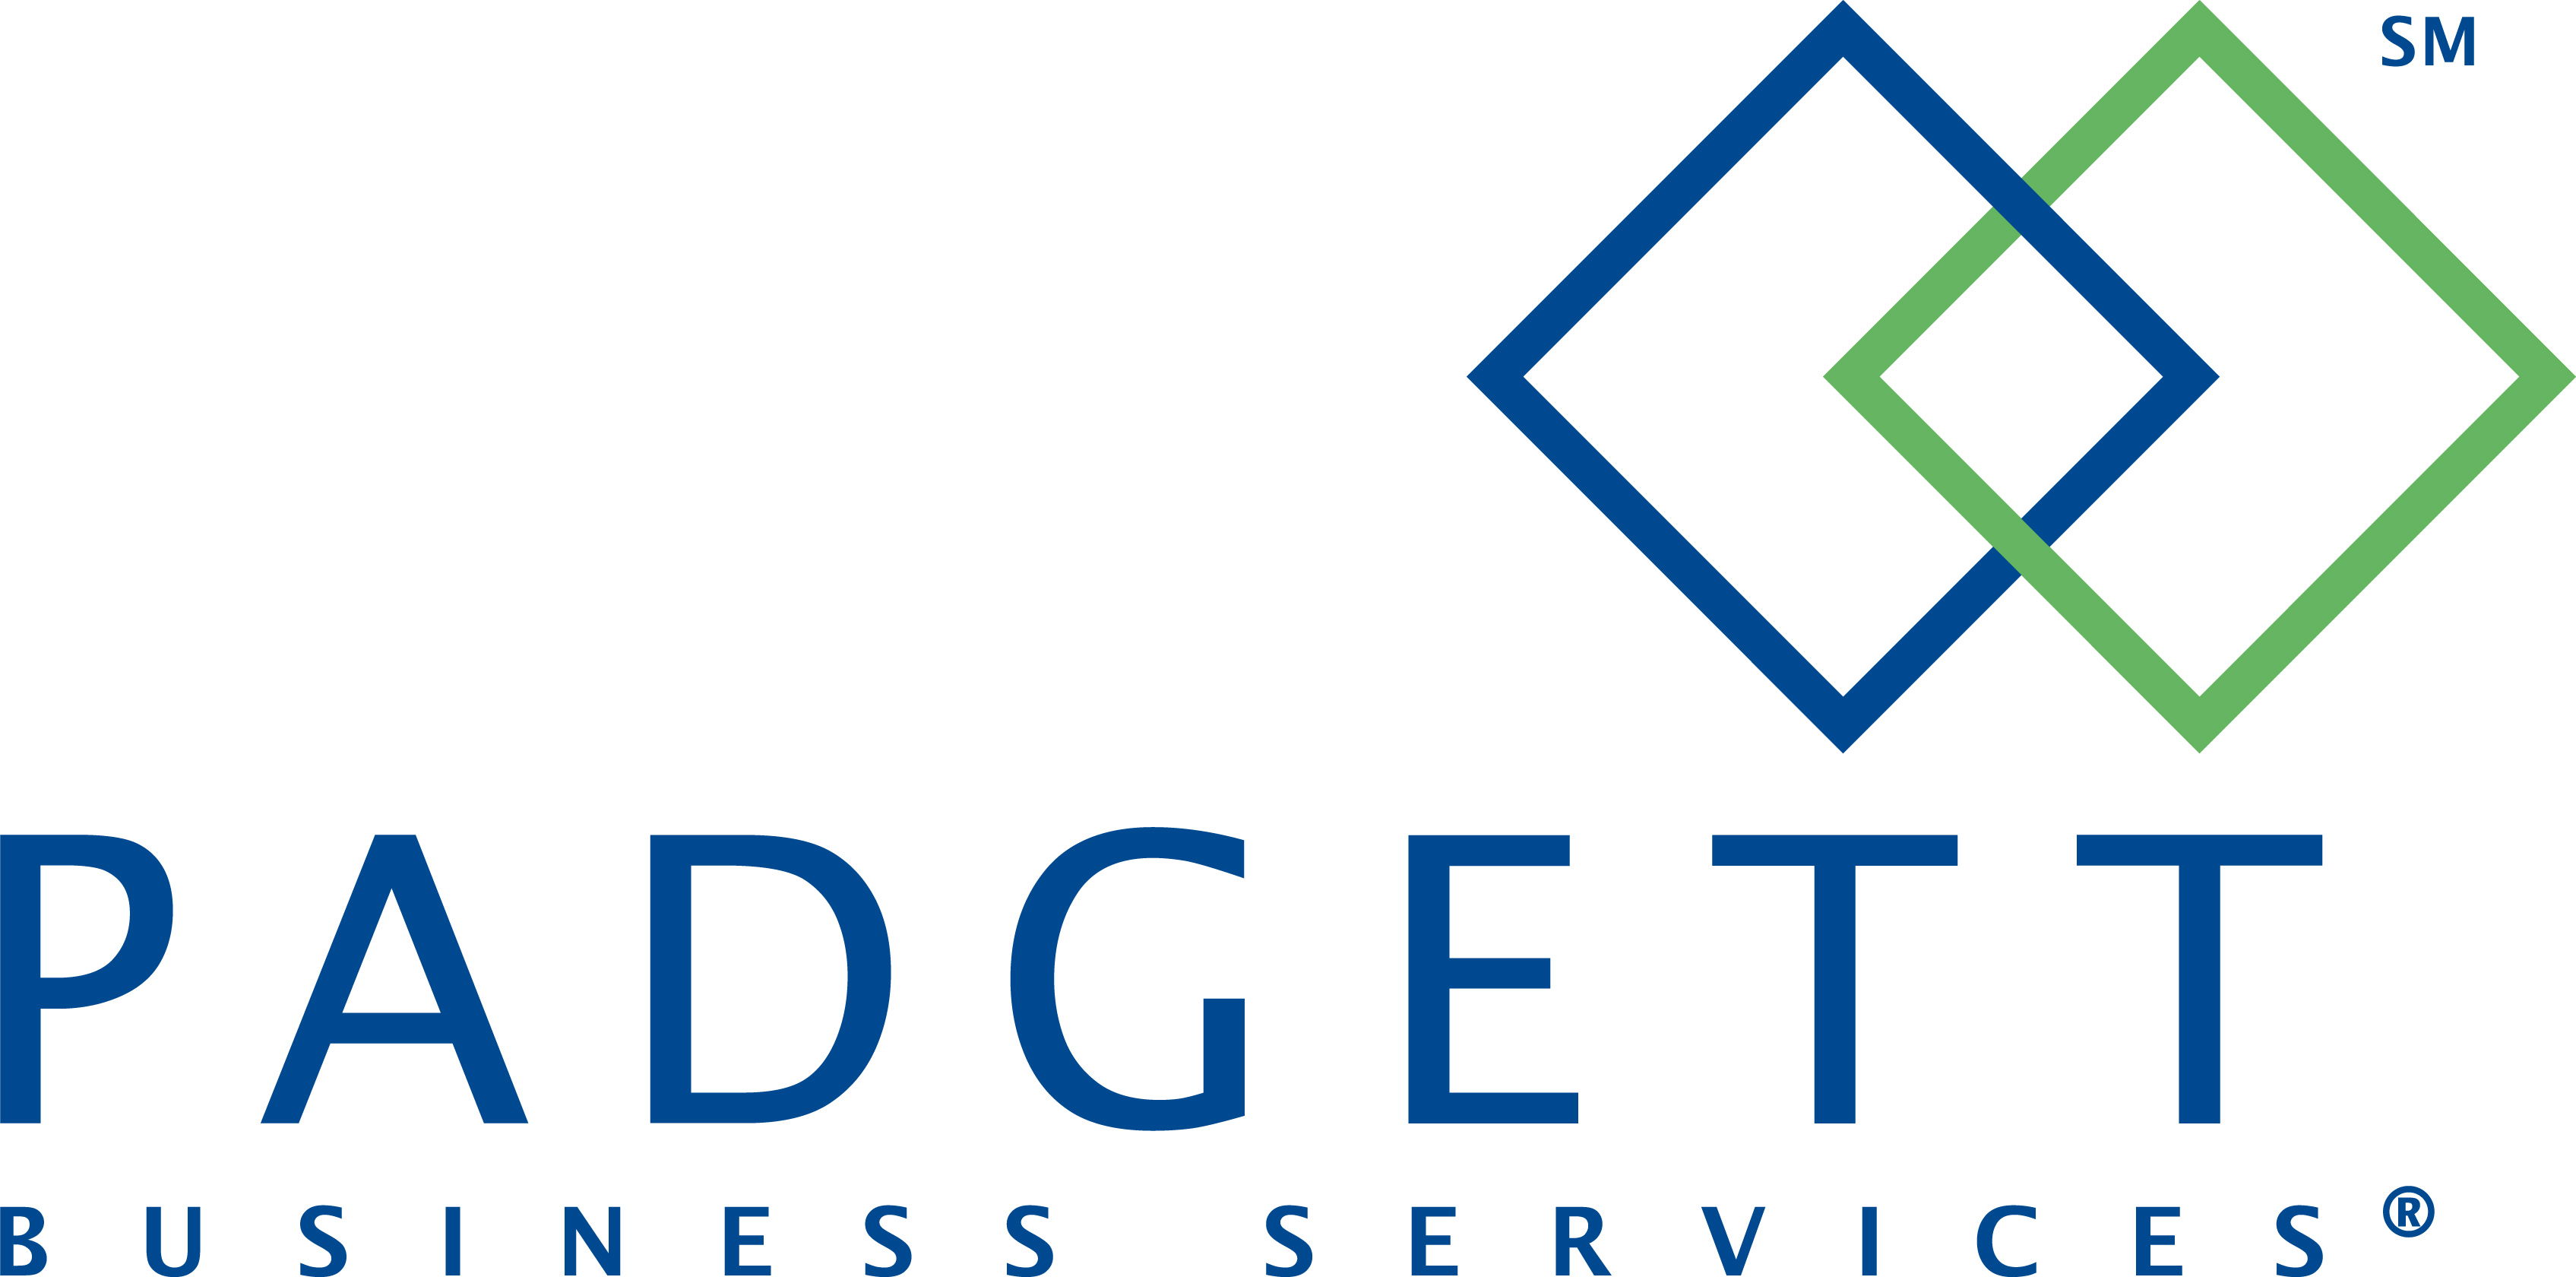 Padgett Business Services is a Sponsor for the Moon Area Instrumental Music Program